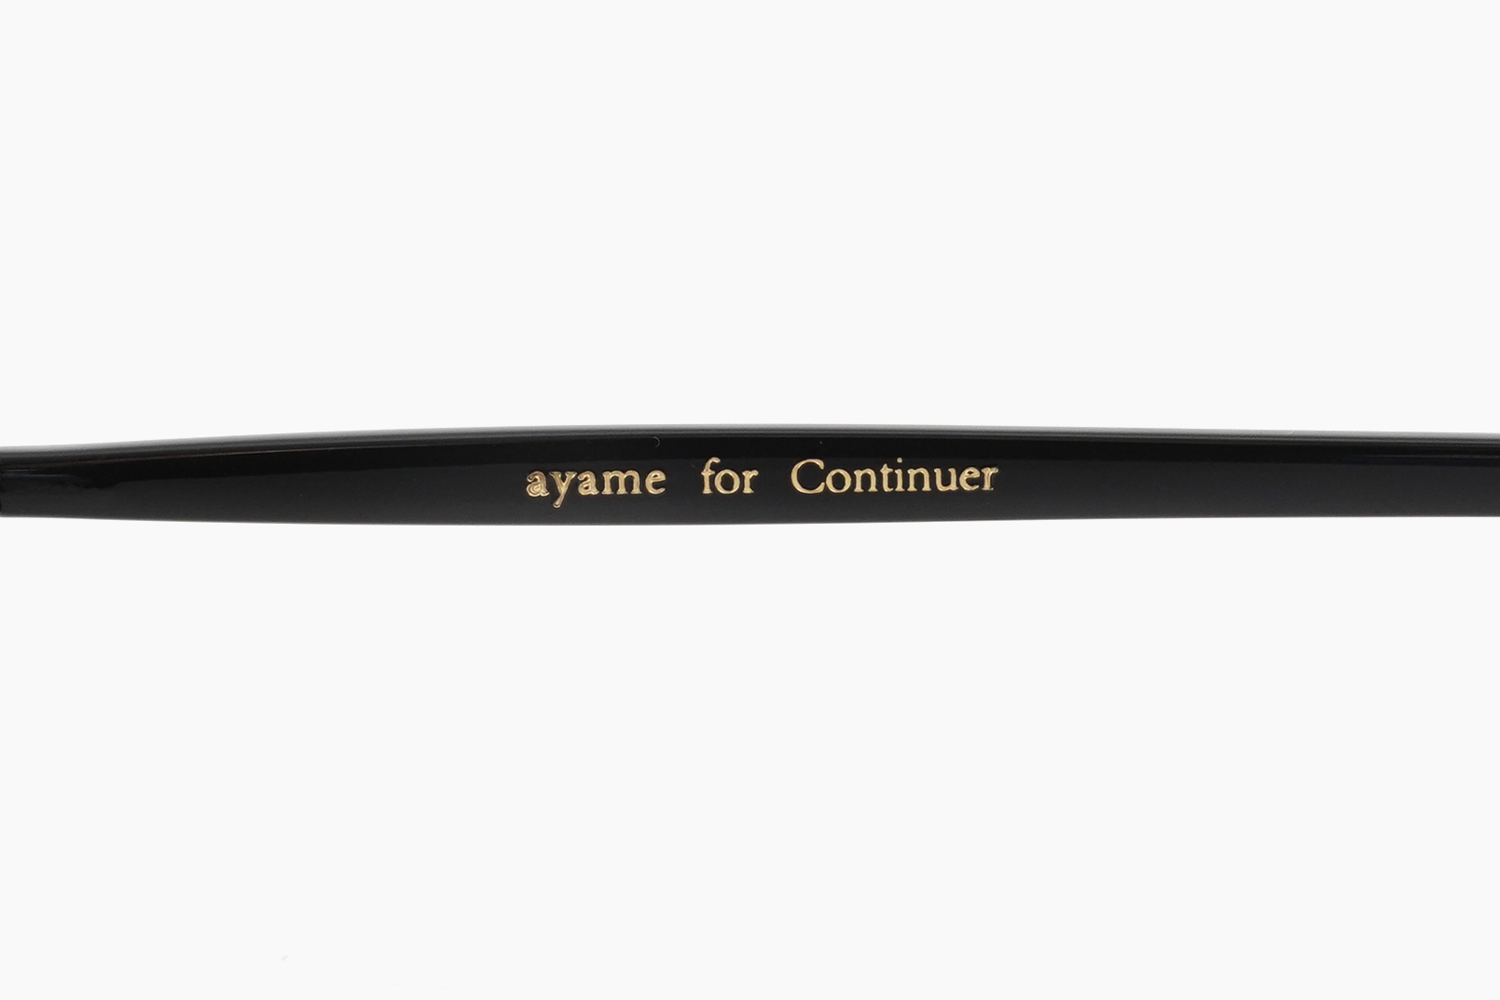 ayame for Continuer | FOCUS square - BKMB｜ayame